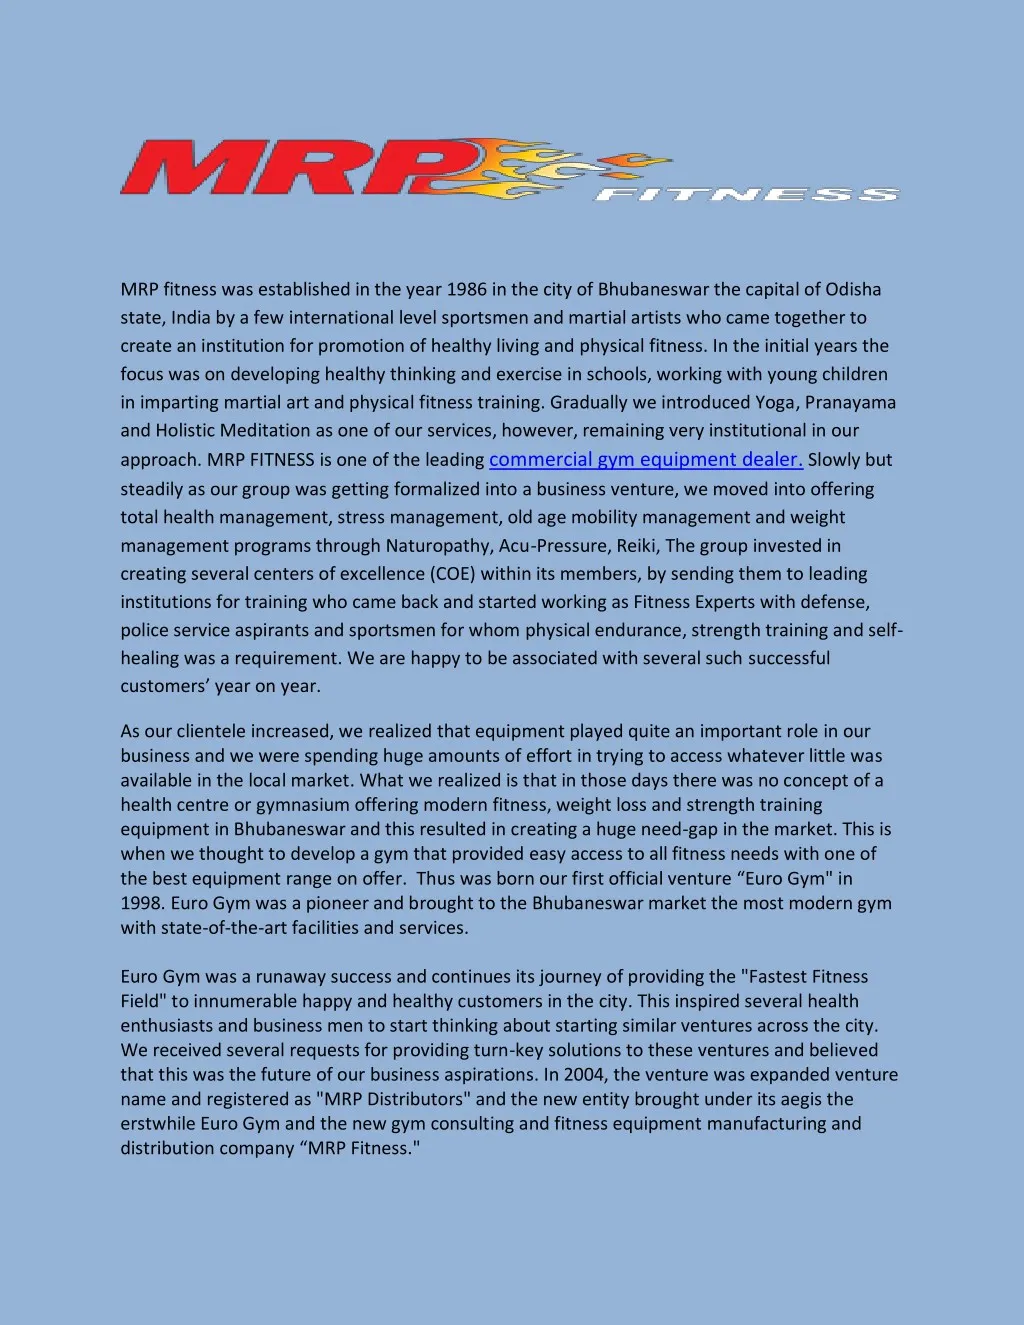 mrp fitness was established in the year 1986